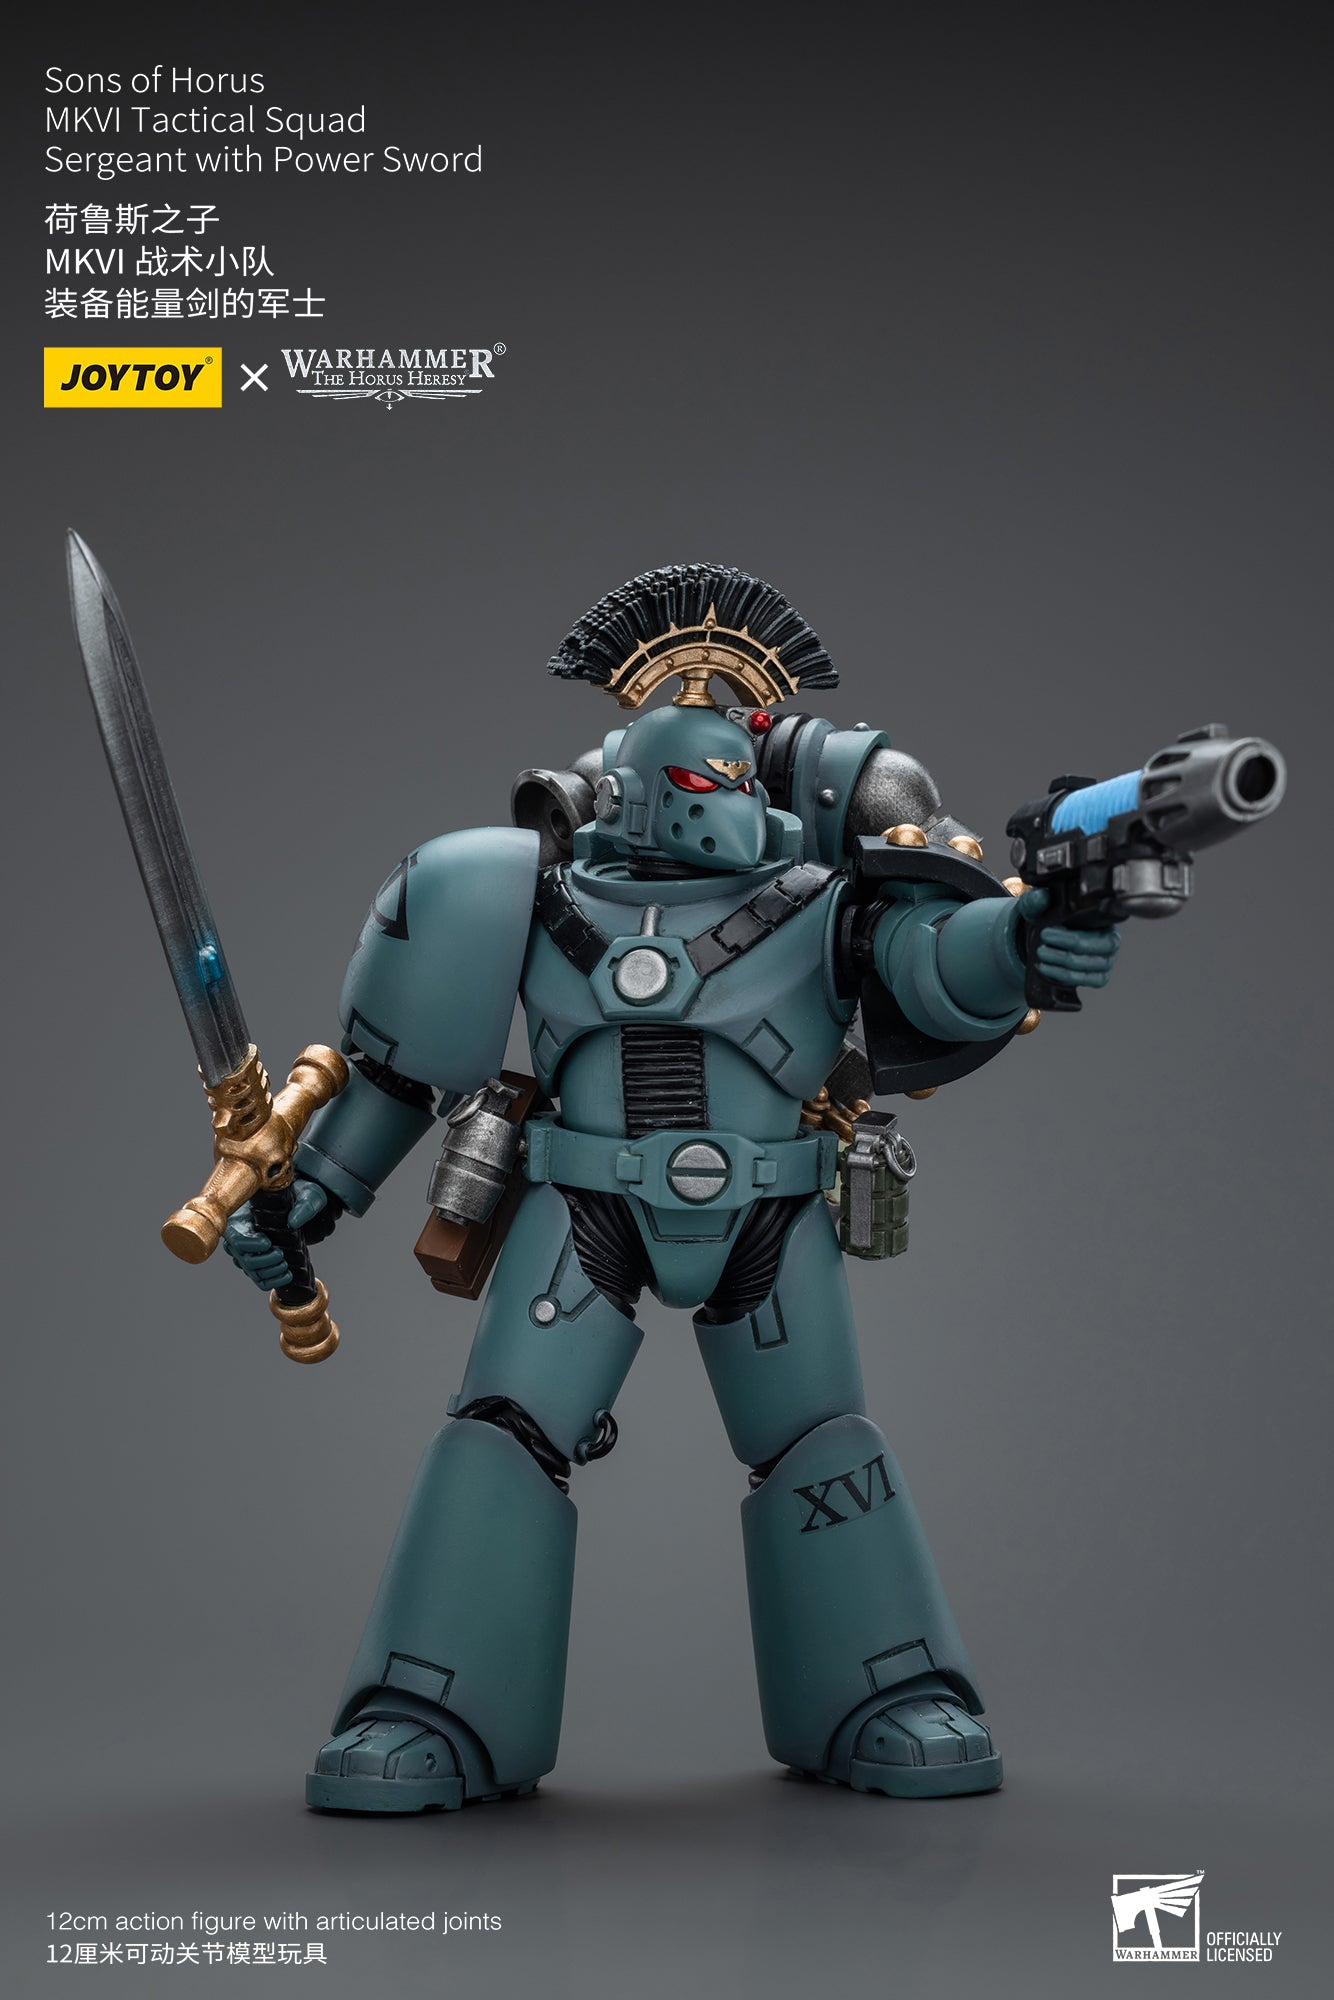 Sons of Horus MKVI Tactical Squad Sergeant with Power Sword - Warhammer 40K Action Figure By JOYTOY